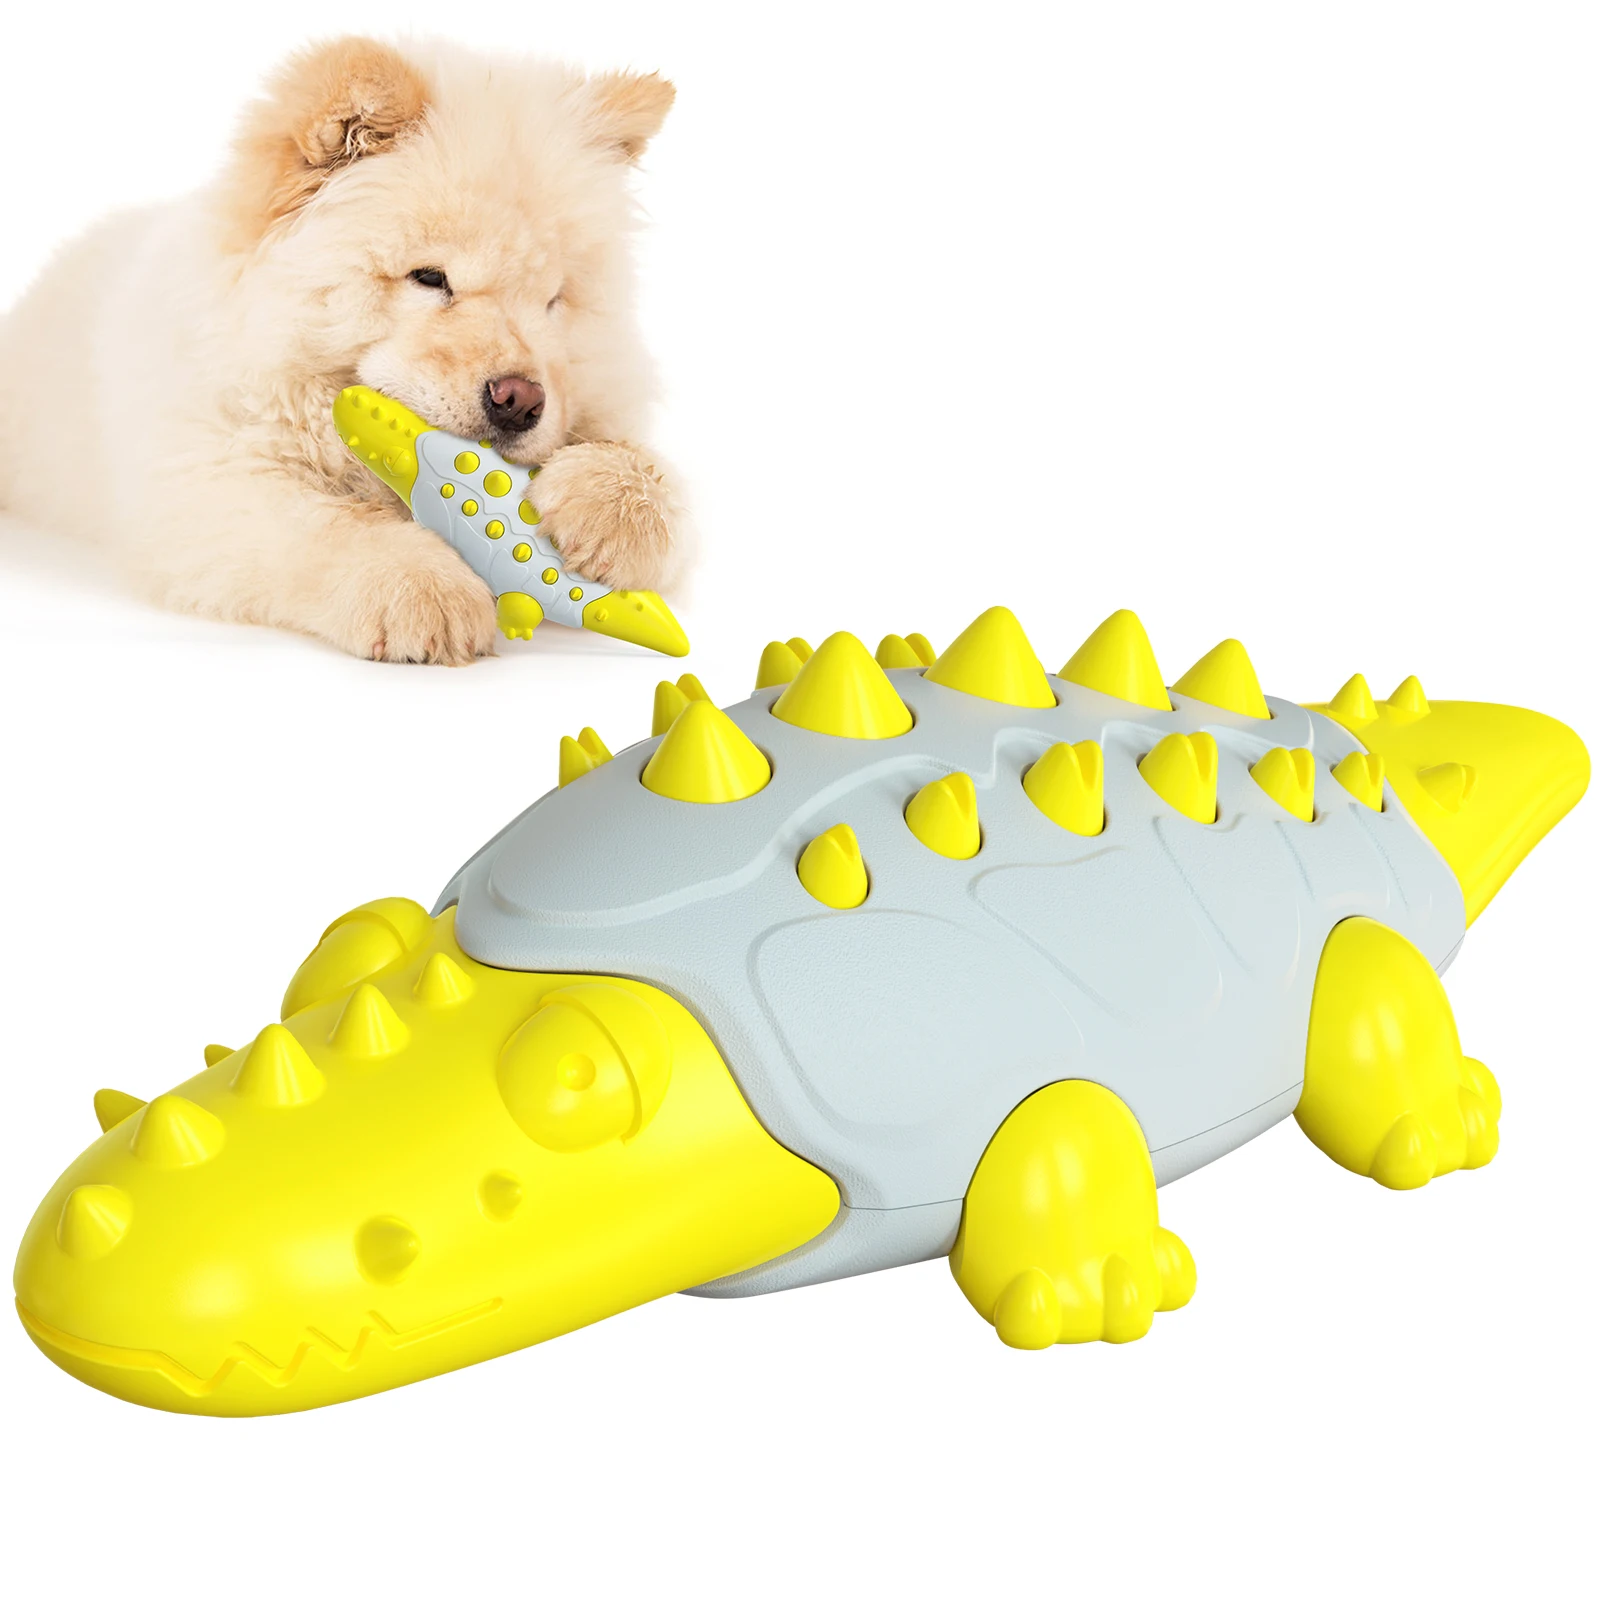 

New Rubber Squeaky Crocodile Shape Dog Chew Toy Dog Toothbrush Toy Special hot selling custom pet chew toy wholesale manufacture